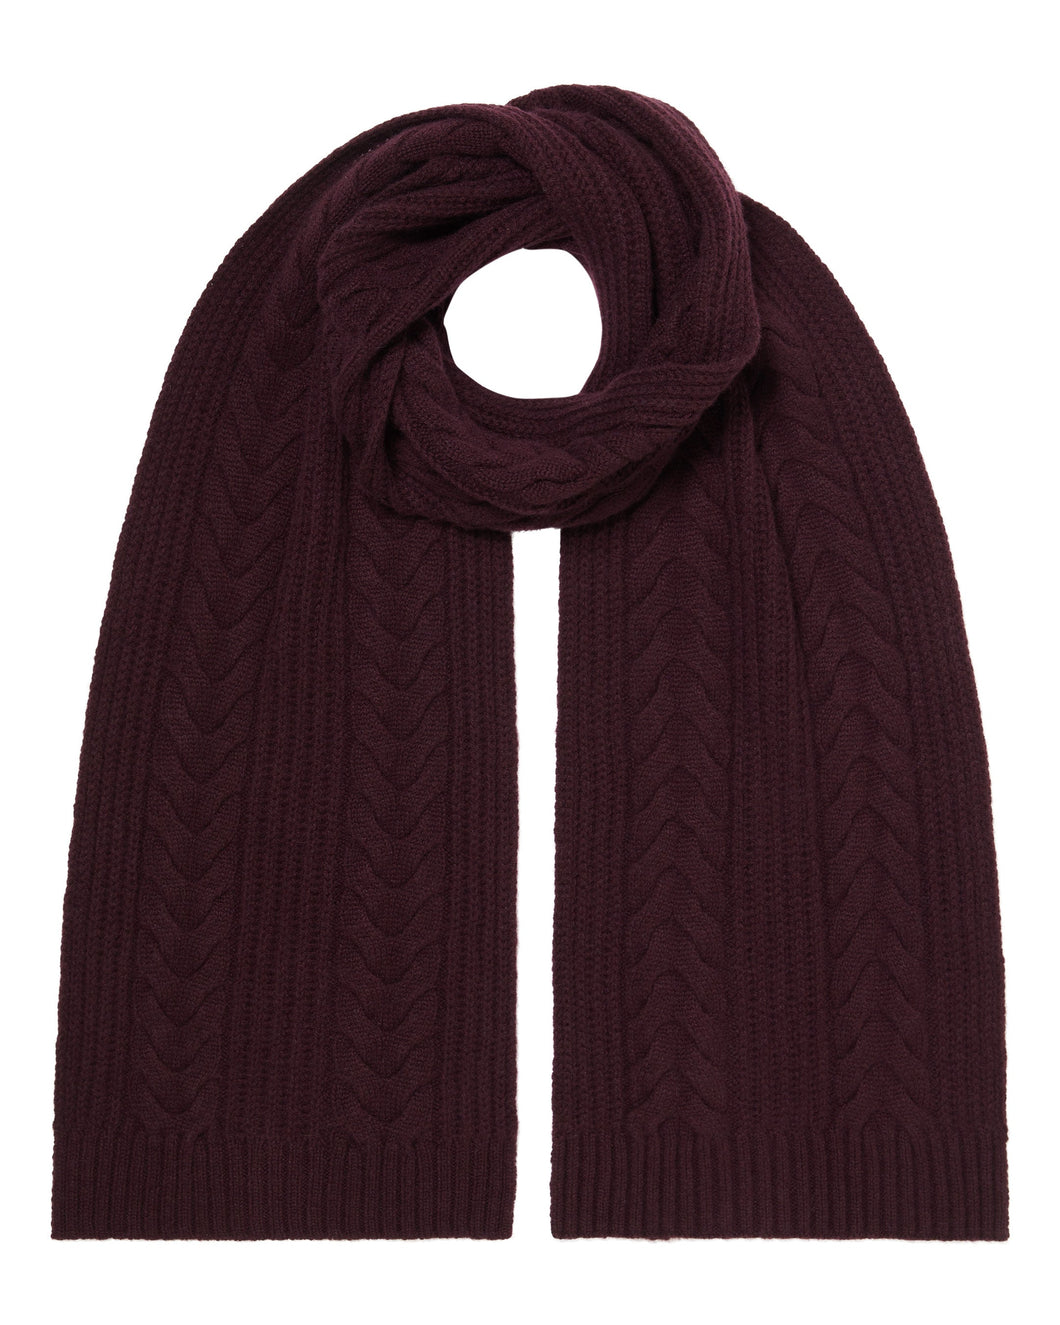 N.Peal Women's Wide Cable Cashmere Scarf Plum Purple